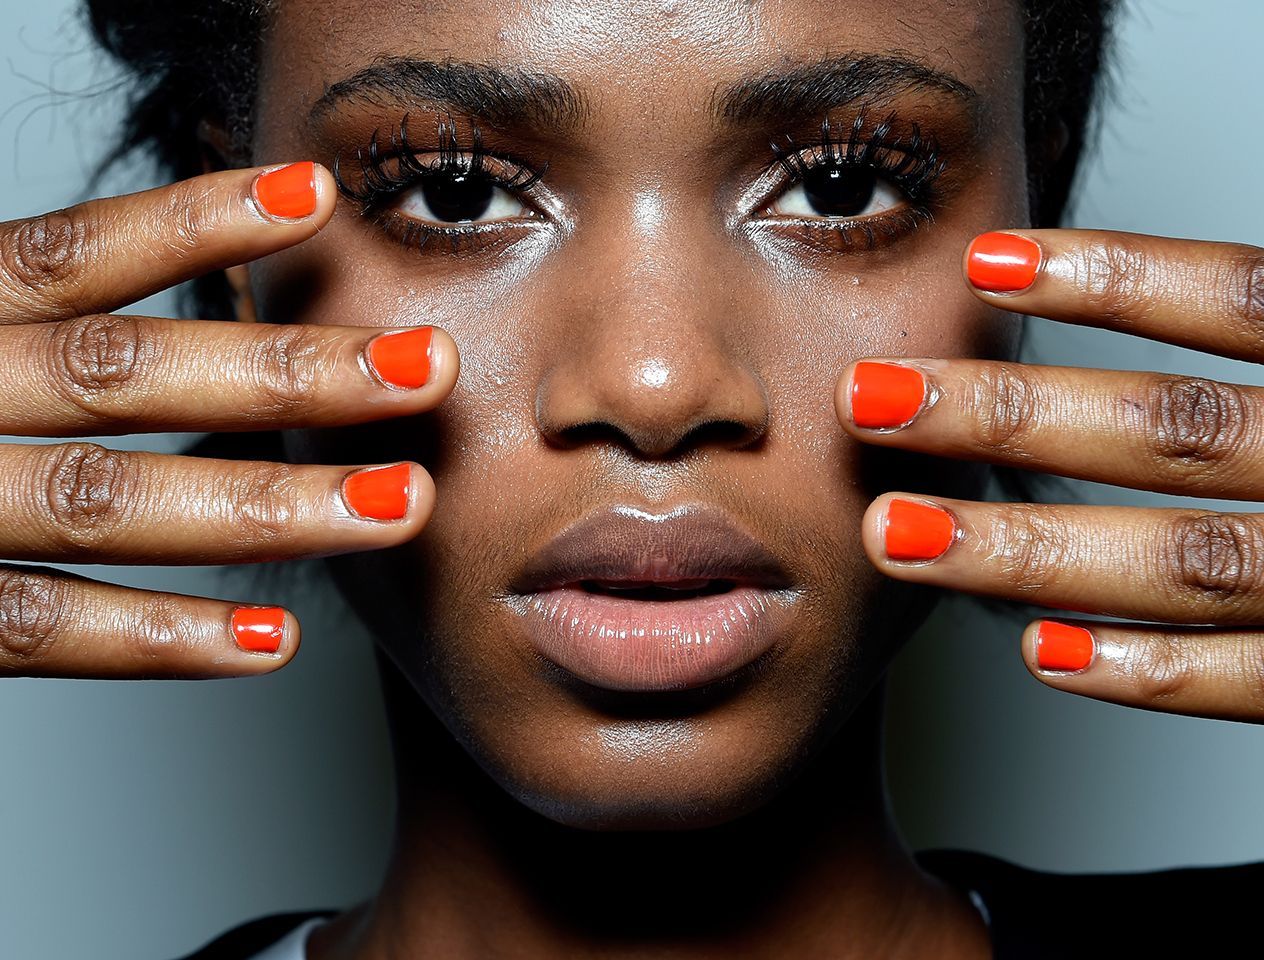 Meet the AW19 nail trends set to become future classics